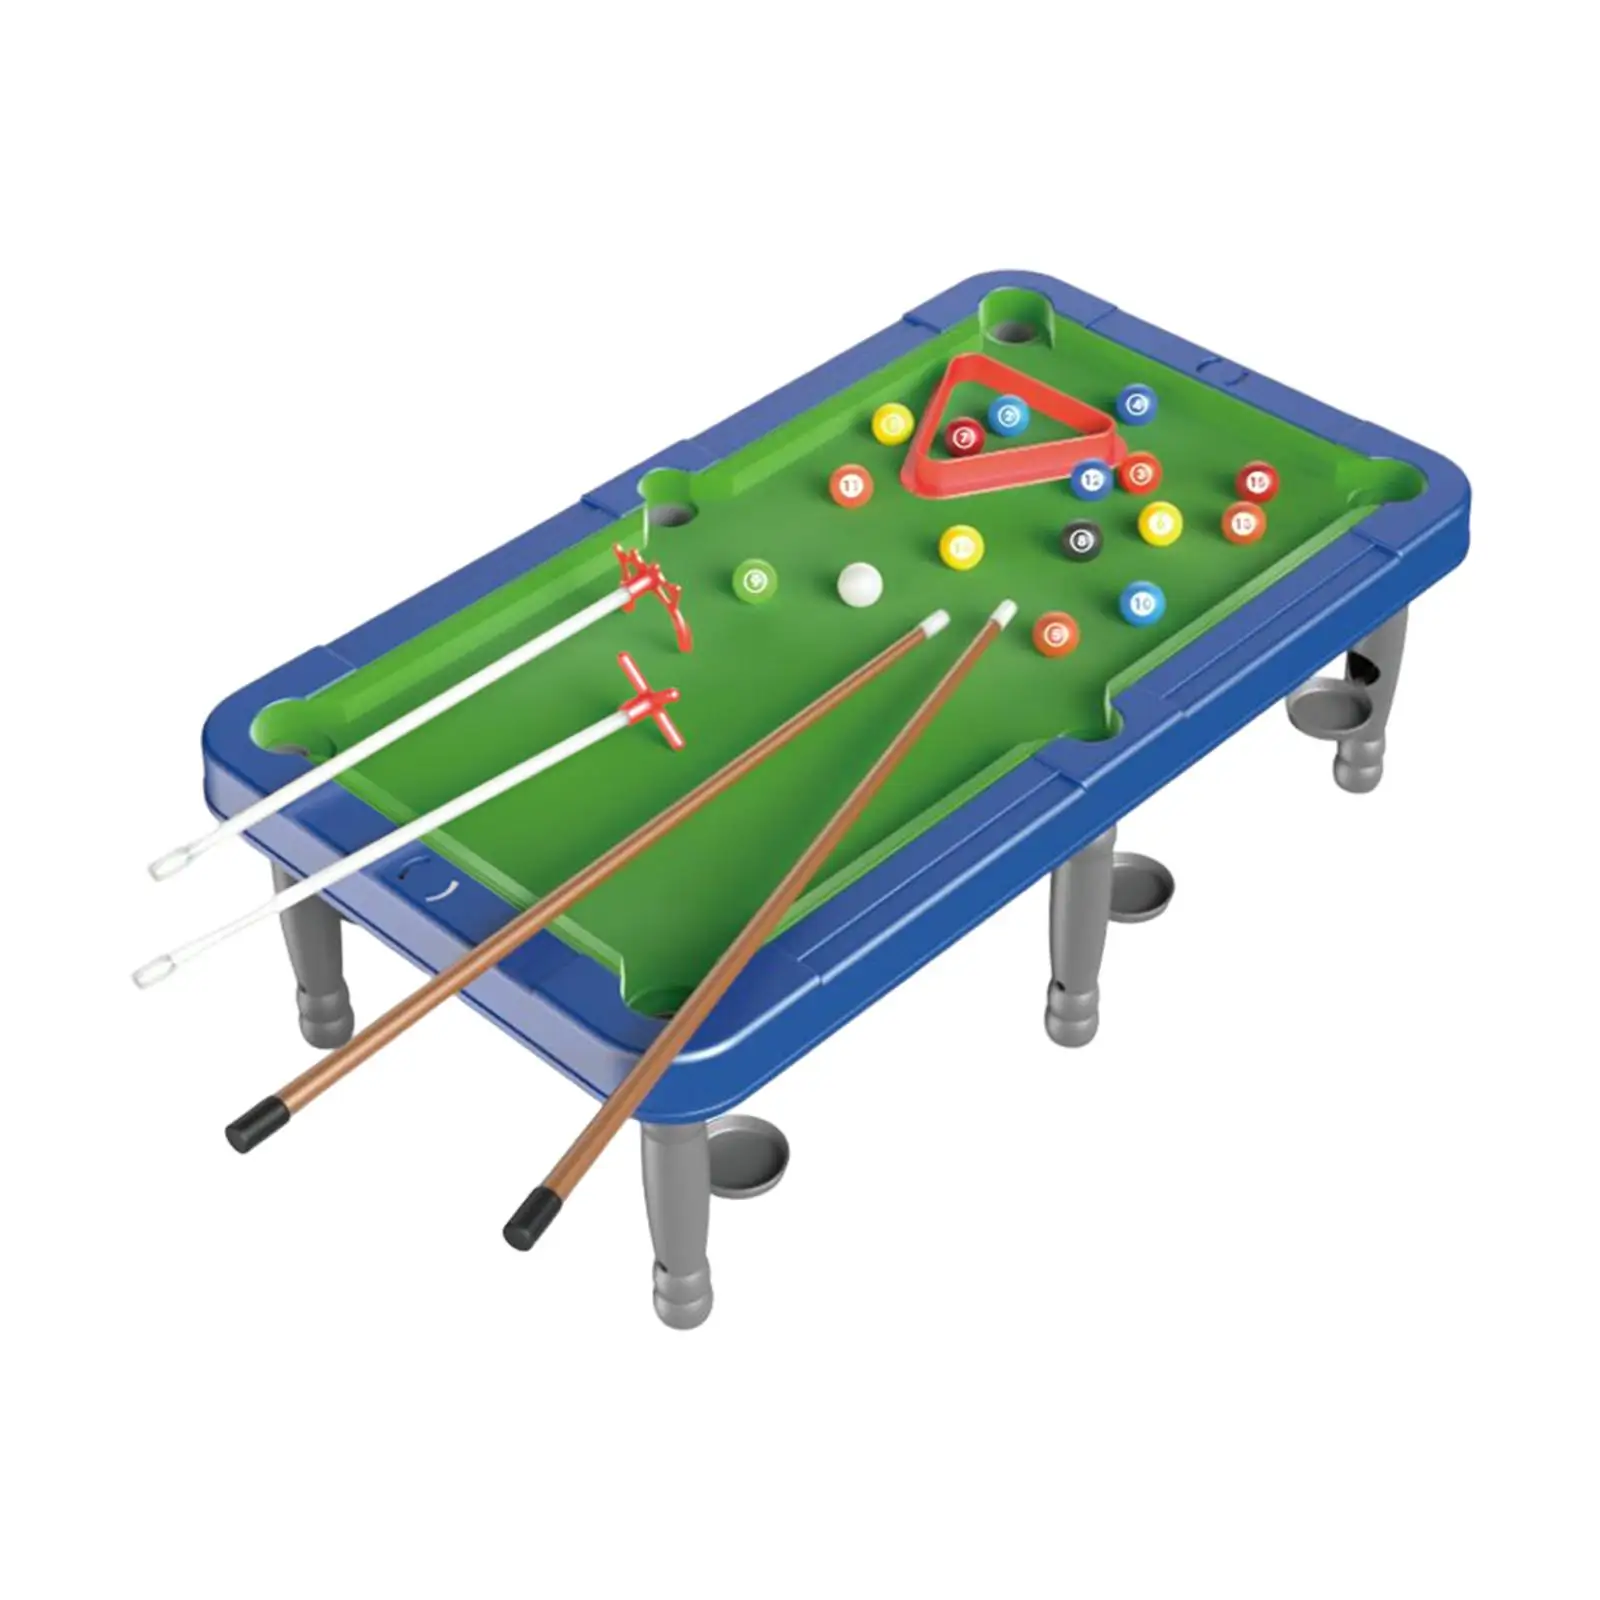 Portable Small Tabletop Billiards Office Use Desktop Bowling Game Toy Games Desktop Snooker Pool Table Set for Boys Girls